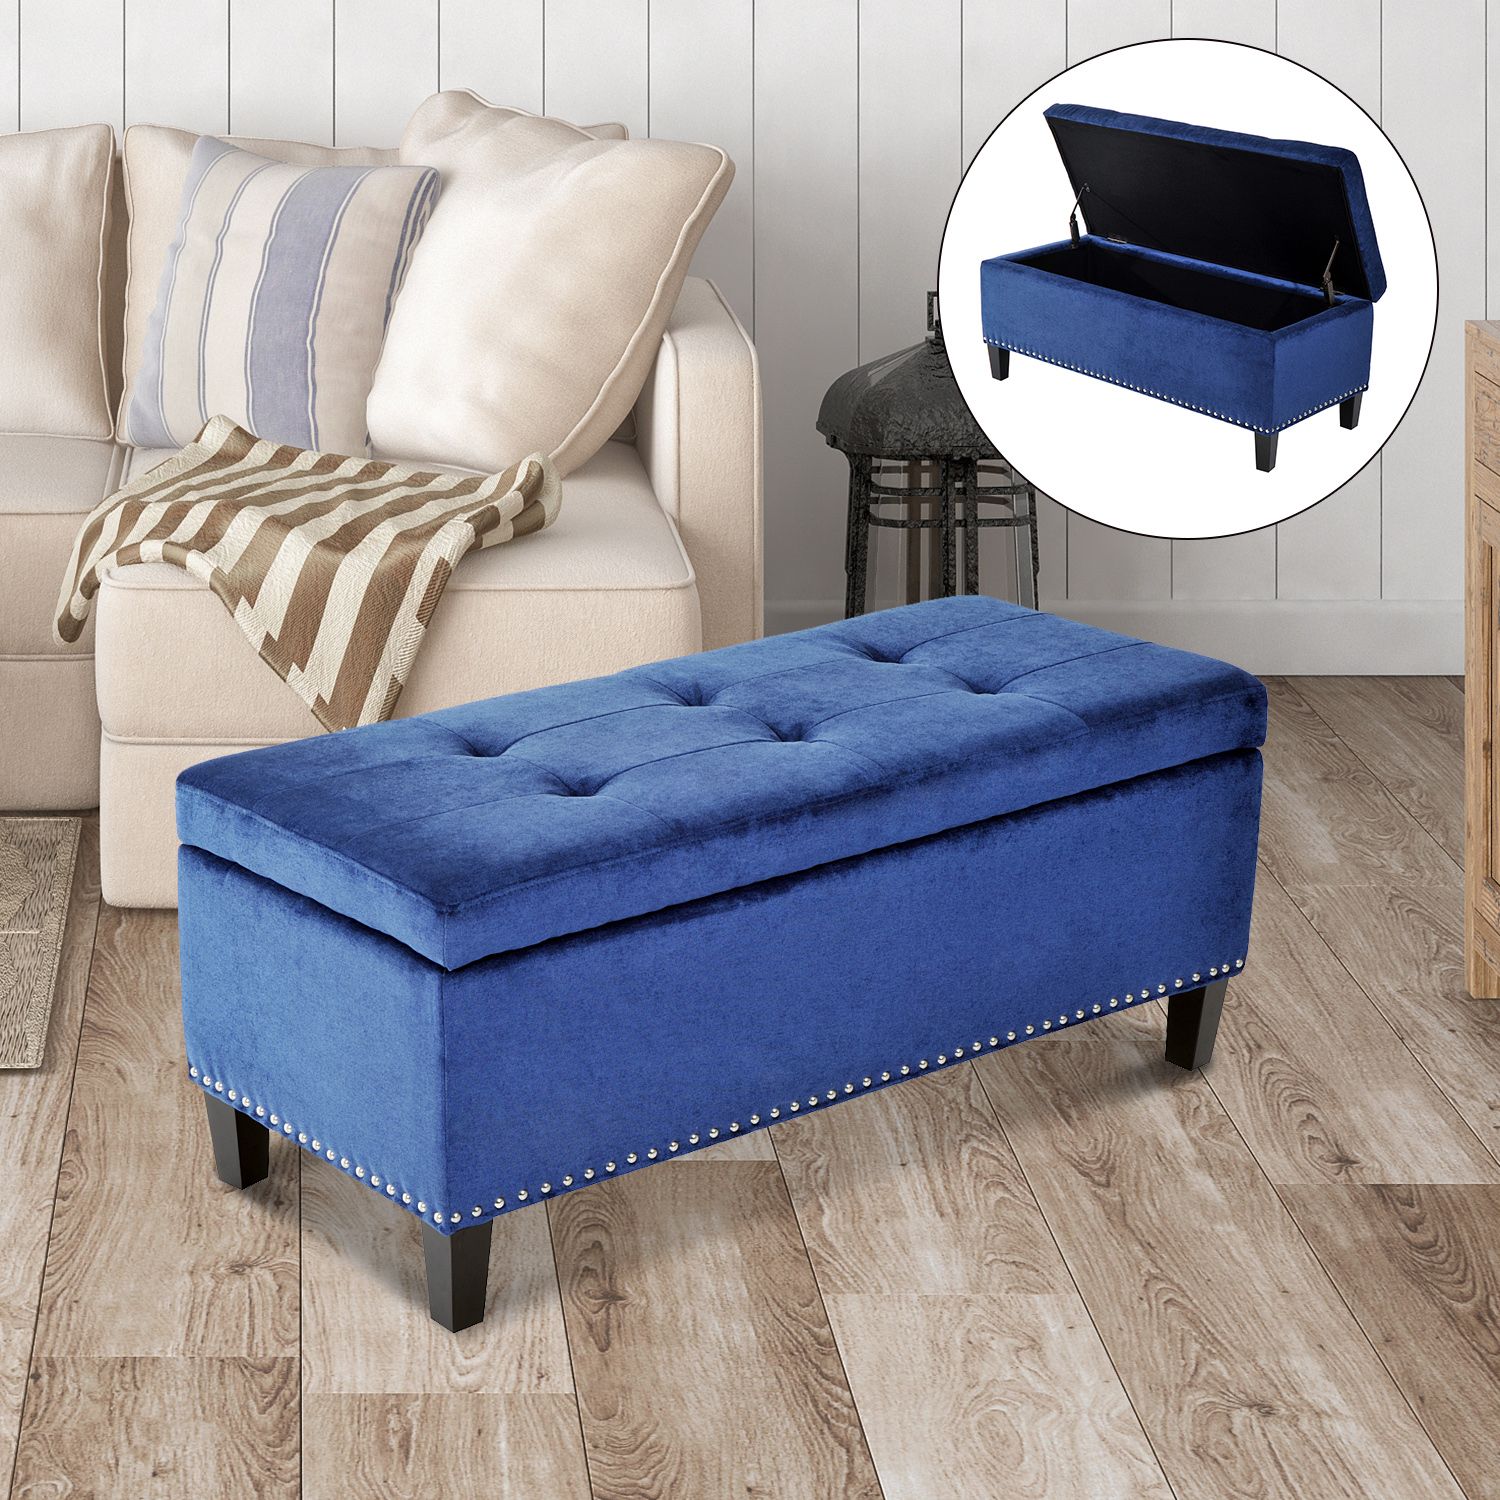 42" Contemporary Tufted Top Storage Ottoman Bench Velvet Fabric Home Intended For Gray Velvet Tufted Storage Ottomans (View 9 of 20)